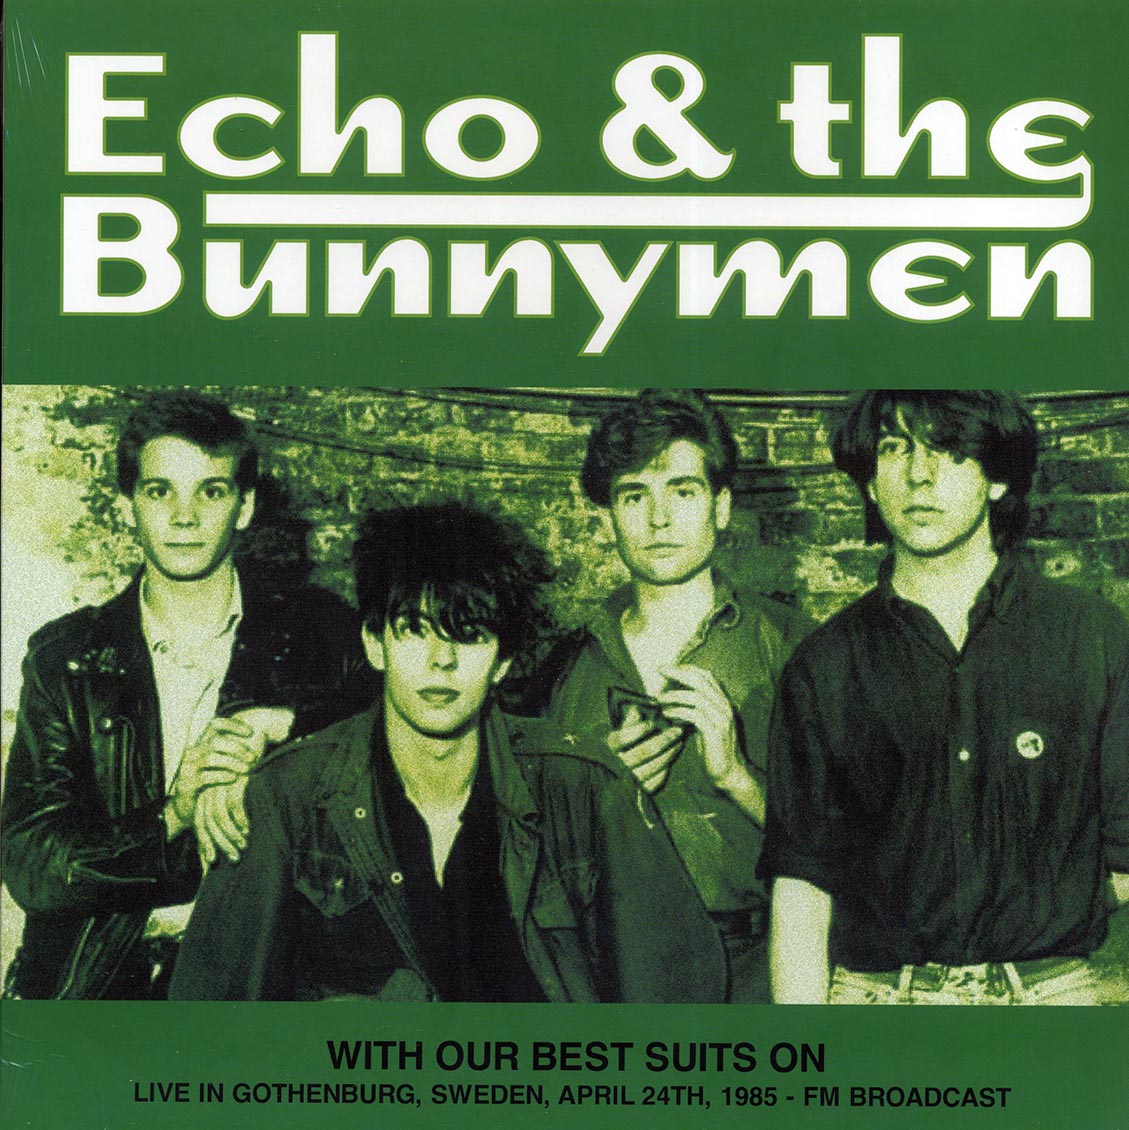 Echo & The Bunnymen - With Our Best Suits On: Live In Gothenburg, Sweden, April 24th, 1985 - Vinyl LP